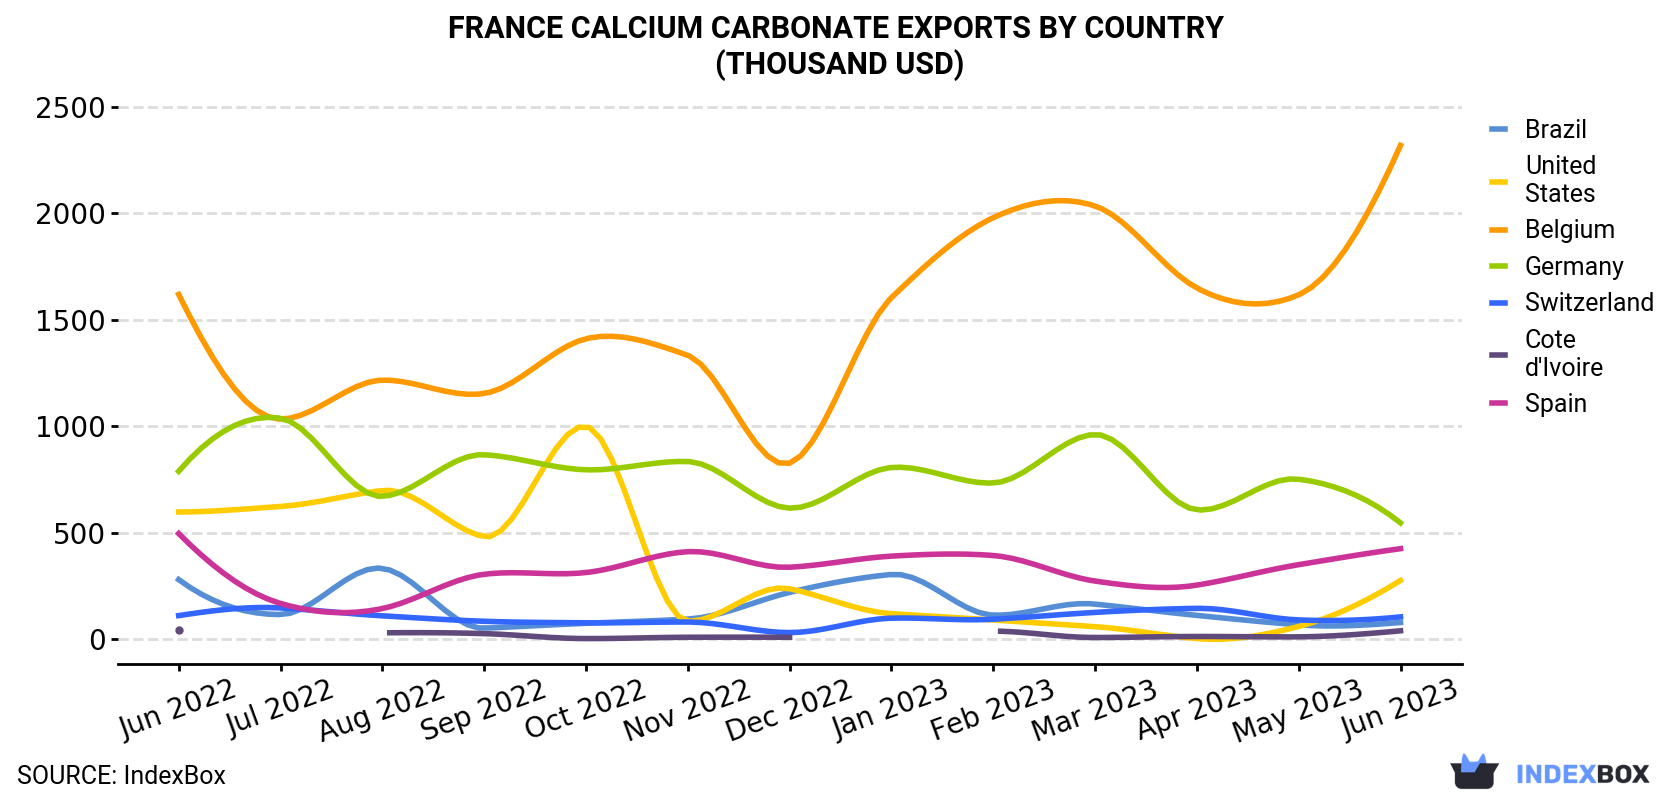 France Calcium Carbonate Exports By Country (Thousand USD)